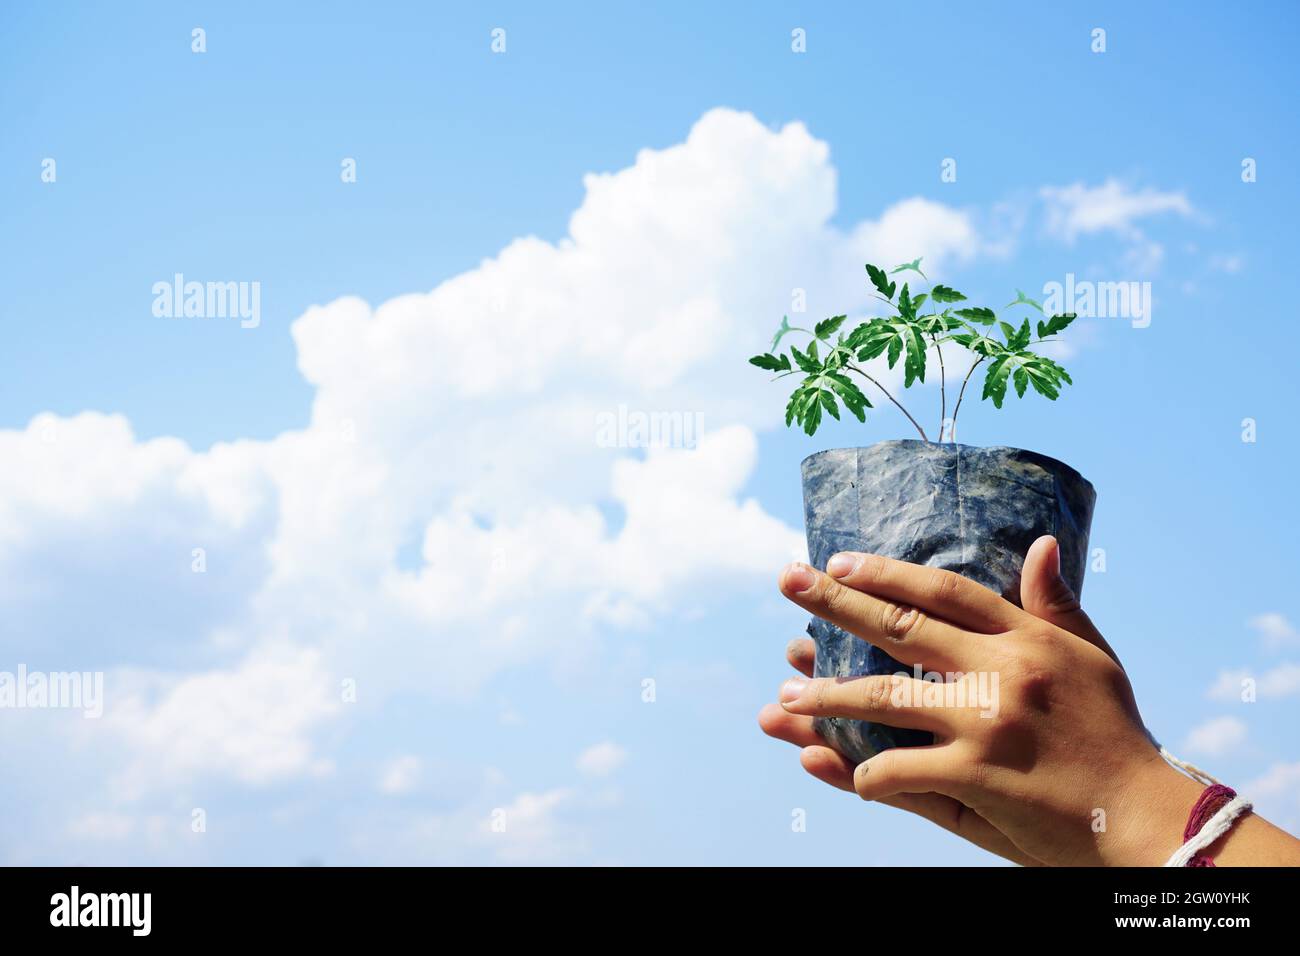 Cropped Hand Holding Plant Against Sky Stock Photo